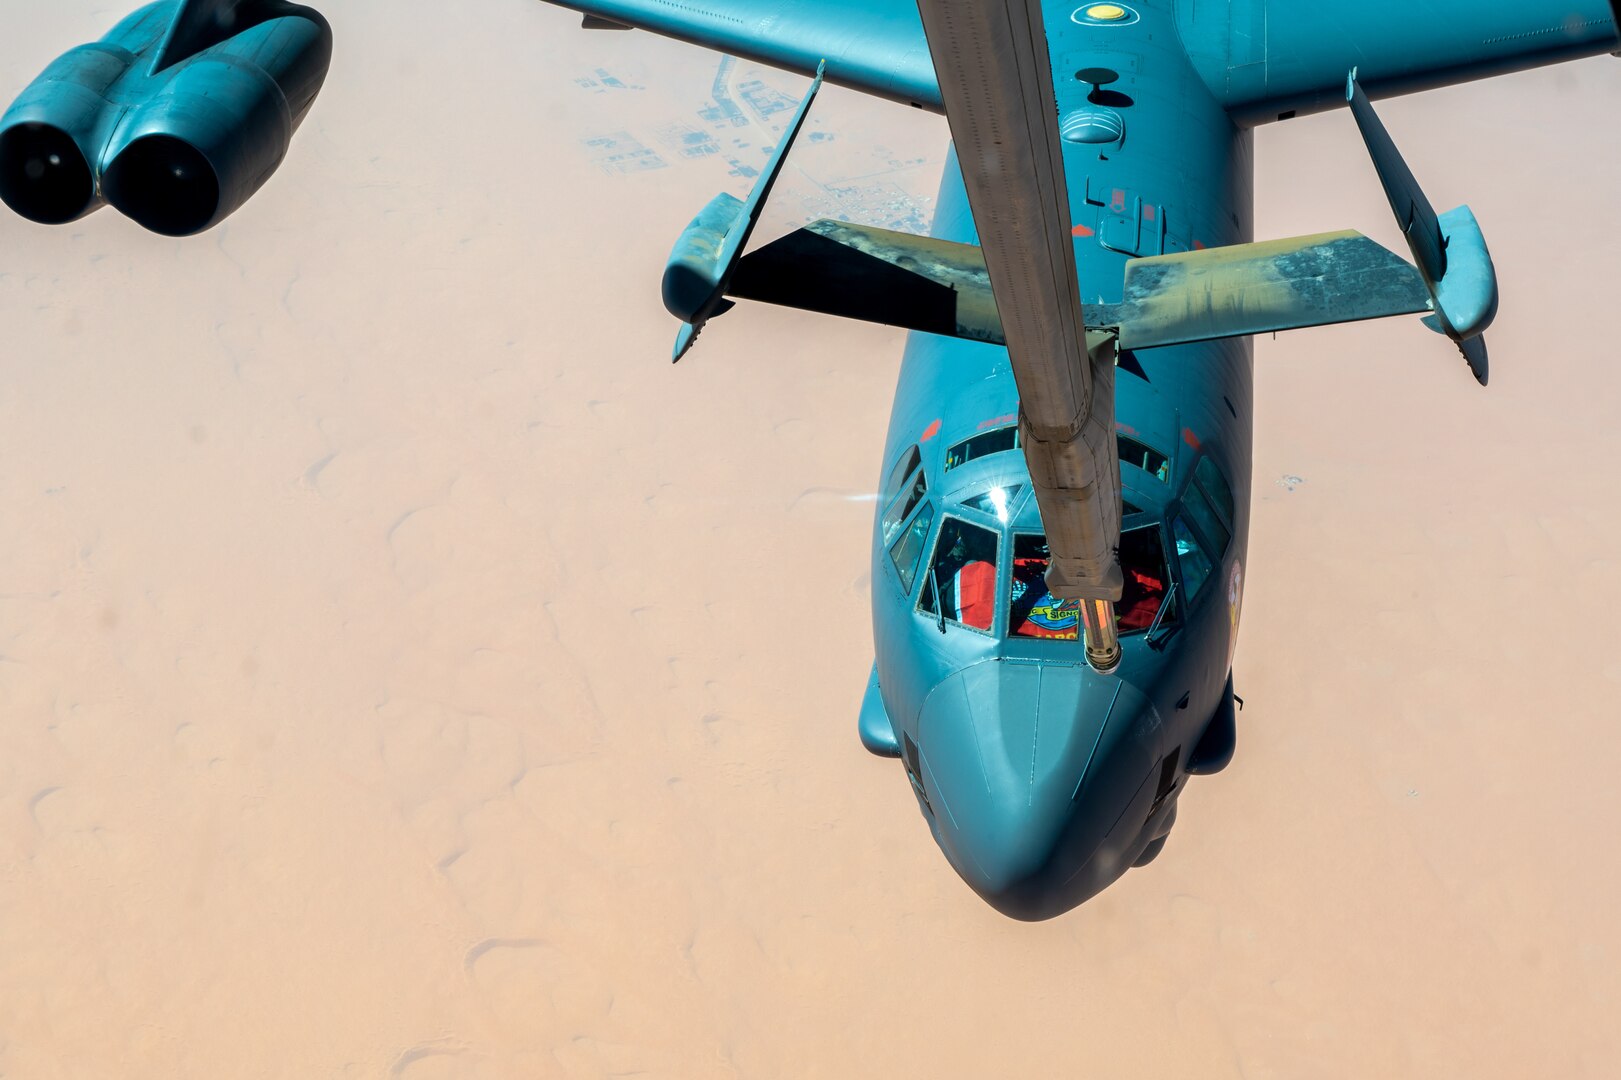 A U.S. Air Force B-52H Stratofortress, assigned to the 5th Bomb Wing, Minot Air Force Base, North Dakota, approaches a KC-10 Extender assigned to the 908th Expeditionary Air Refueling Squadron, Prince Sultan Air Base, Kingdom of Saudi Arabia, for air refueling support, during a Bomber Task Force mission, over the U.S. Central Command area of responsibility, Sept. 4, 2022. BTF missions demonstrate the U.S.’s commitment to regional security and stability by showing how the U.S. will decisively respond to threats against U.S., coalition and partner forces. (U.S. Air Force photo by Staff Sgt. Shannon Bowman)